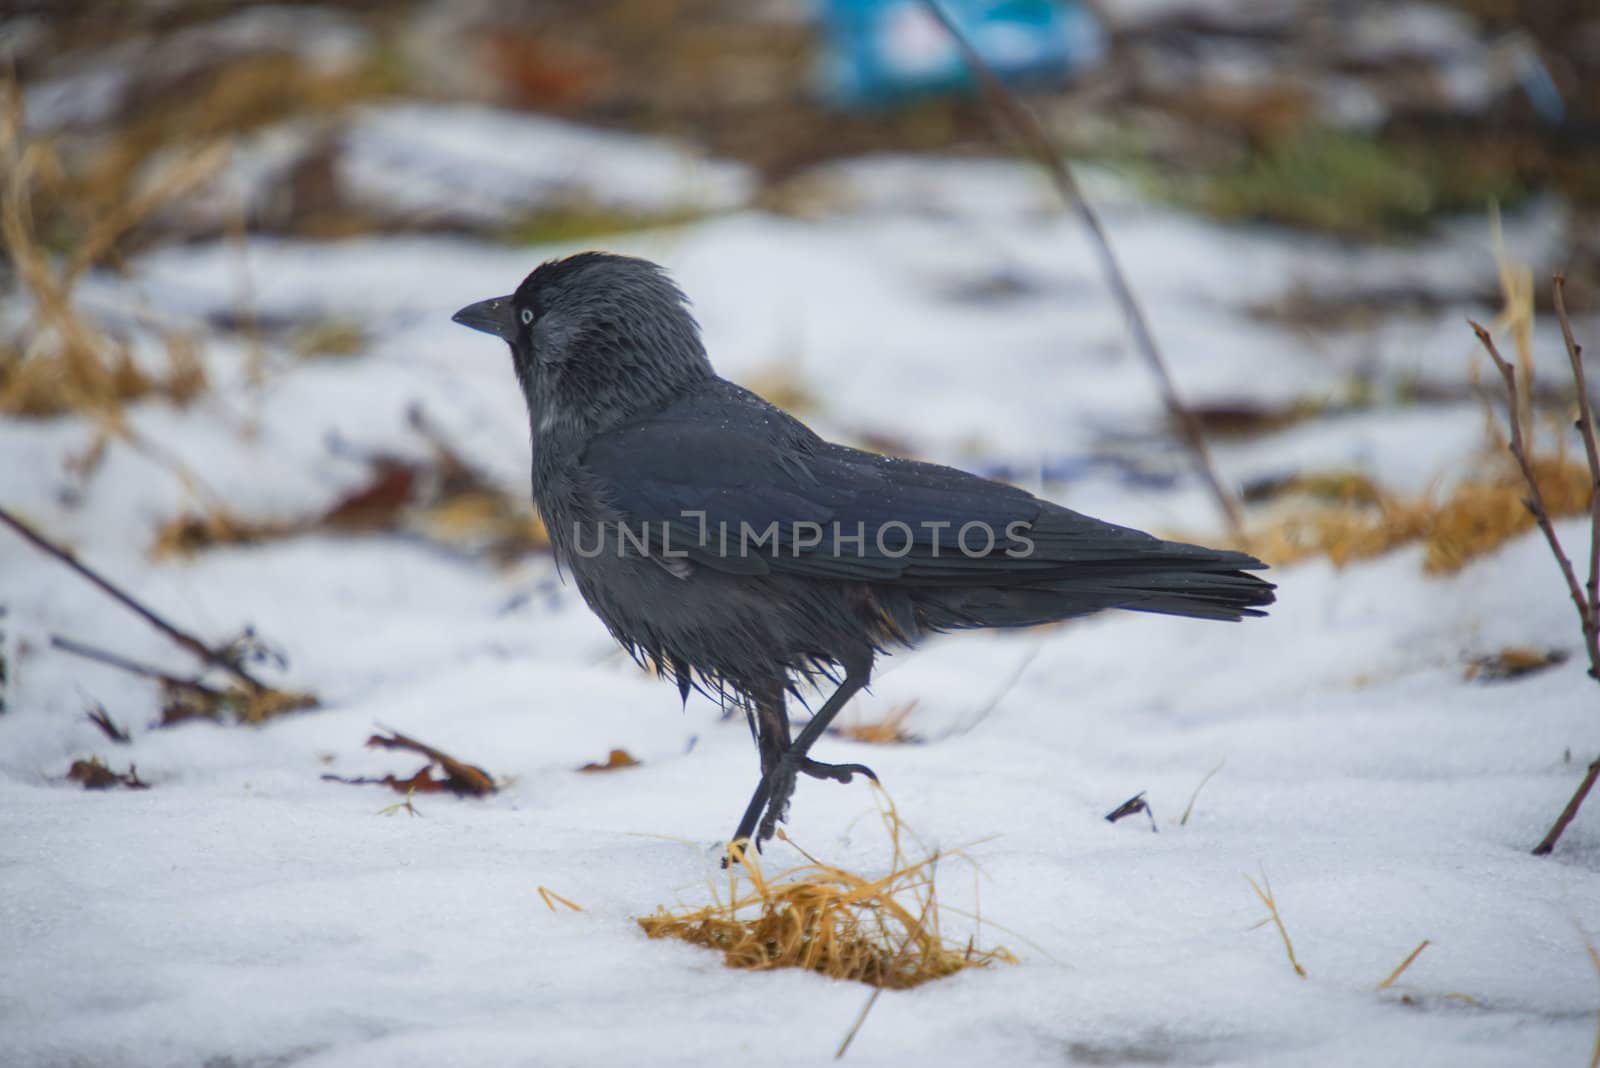 there is a teeming bird life at the tista river in Halden, the picture is shot one day in february 2013 and shows a jackdaw looking for food